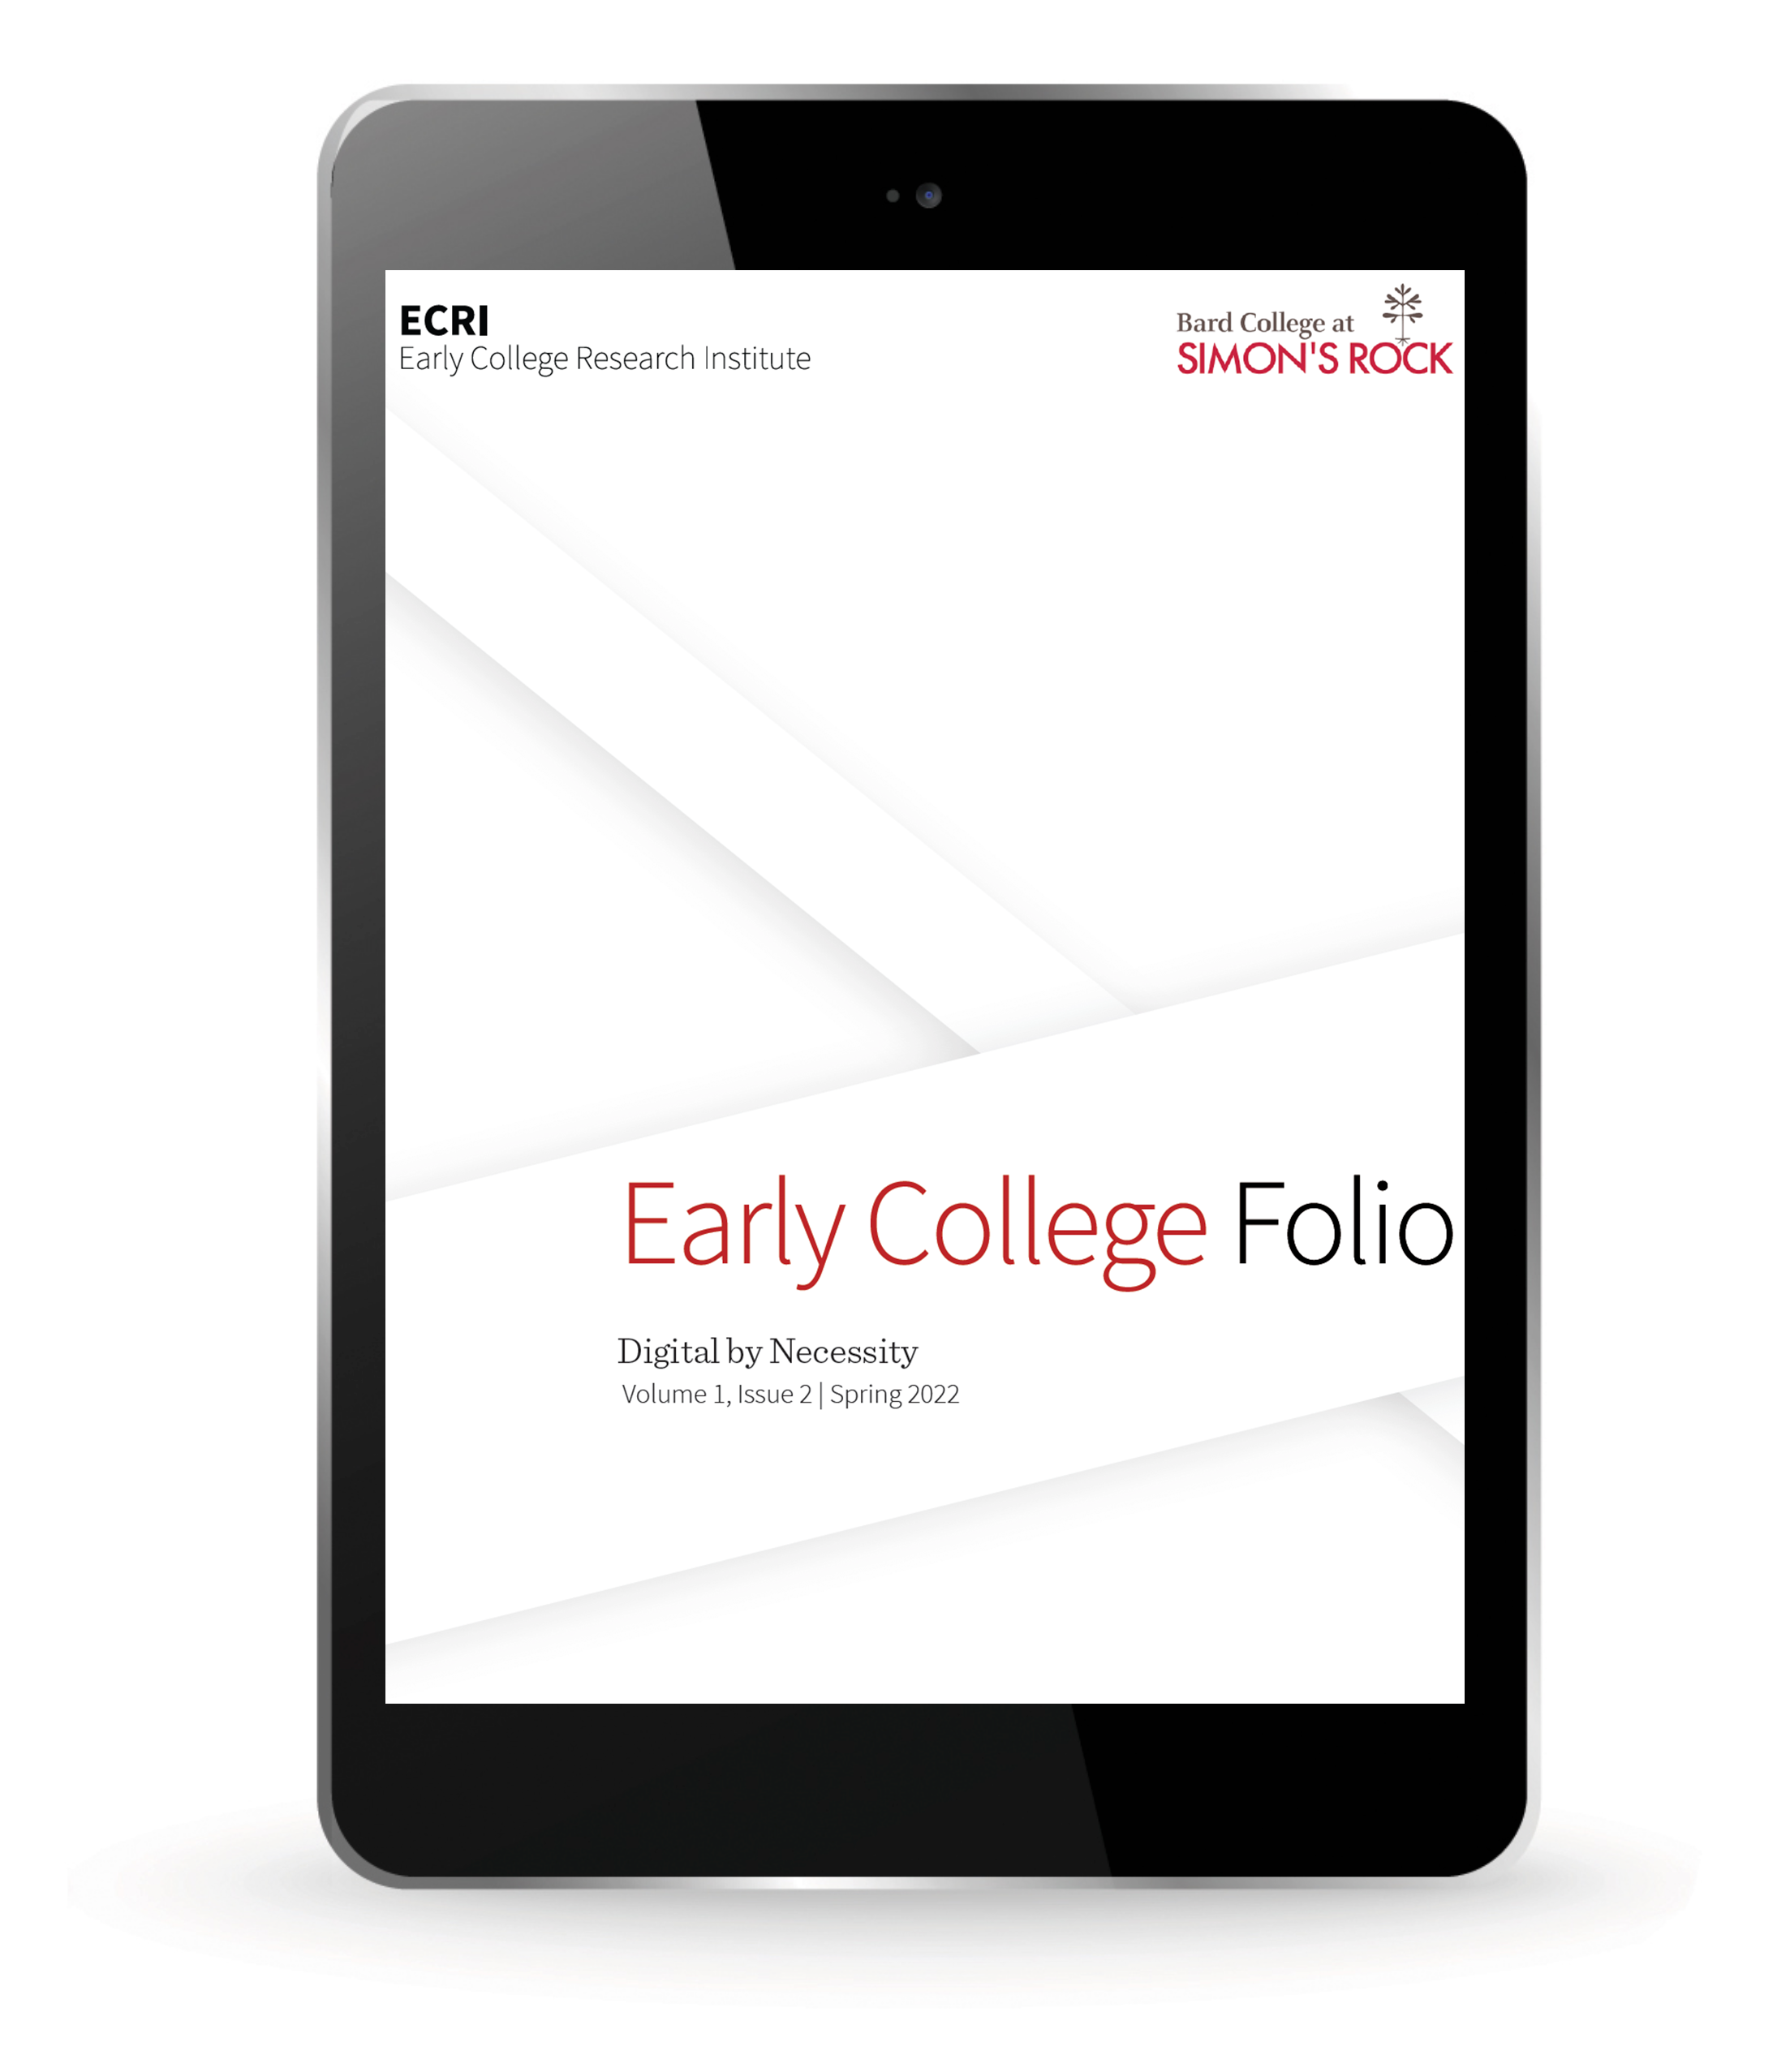 early-college-folio_tablet_view1_.png